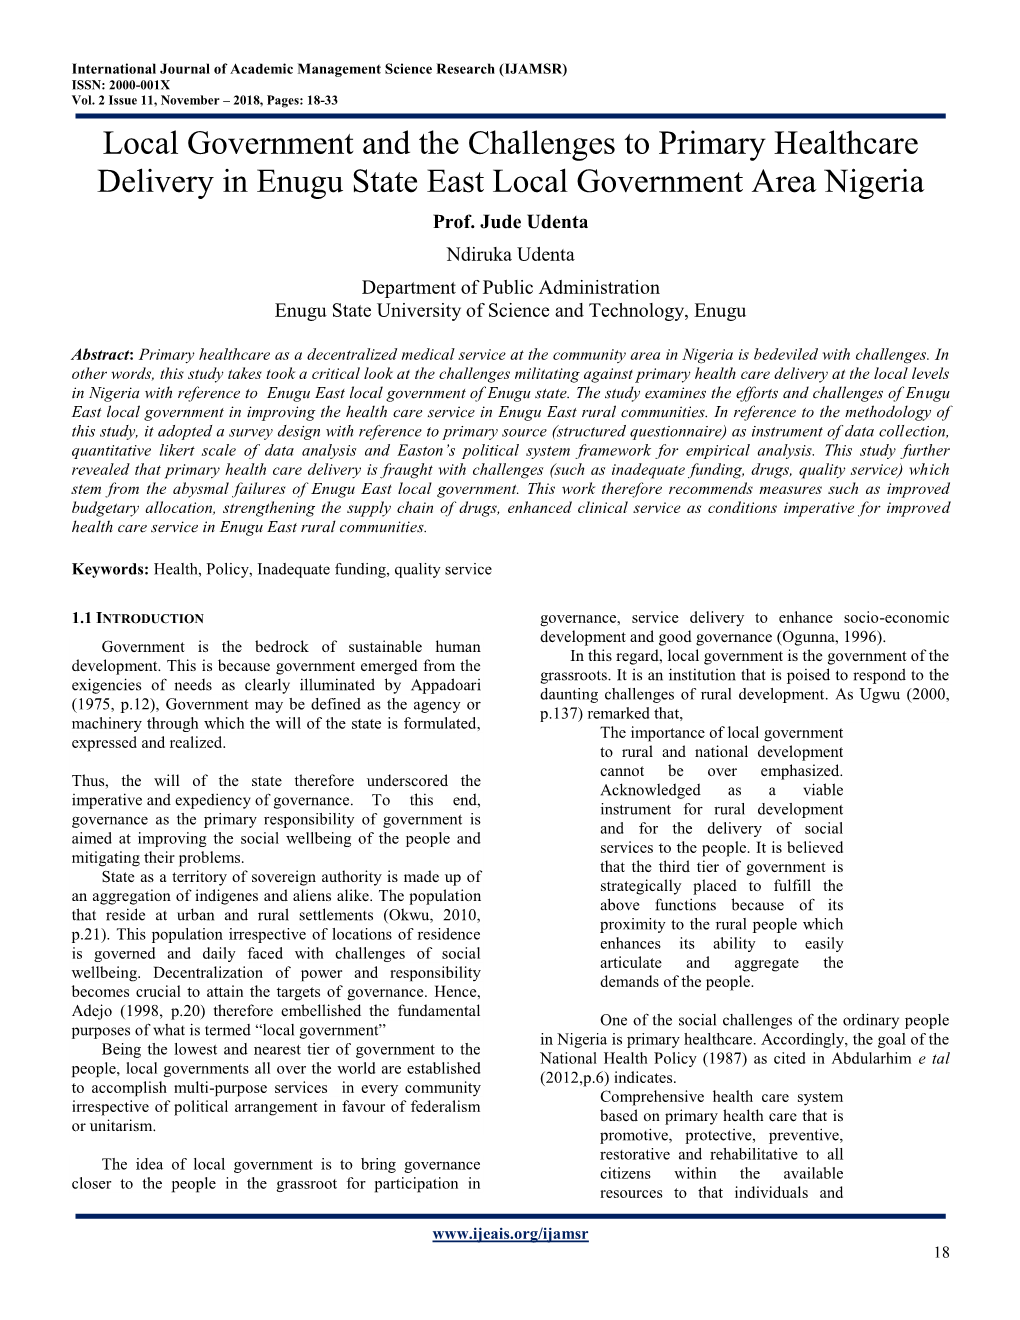 Local Government and the Challenges to Primary Healthcare Delivery in Enugu State East Local Government Area Nigeria Prof